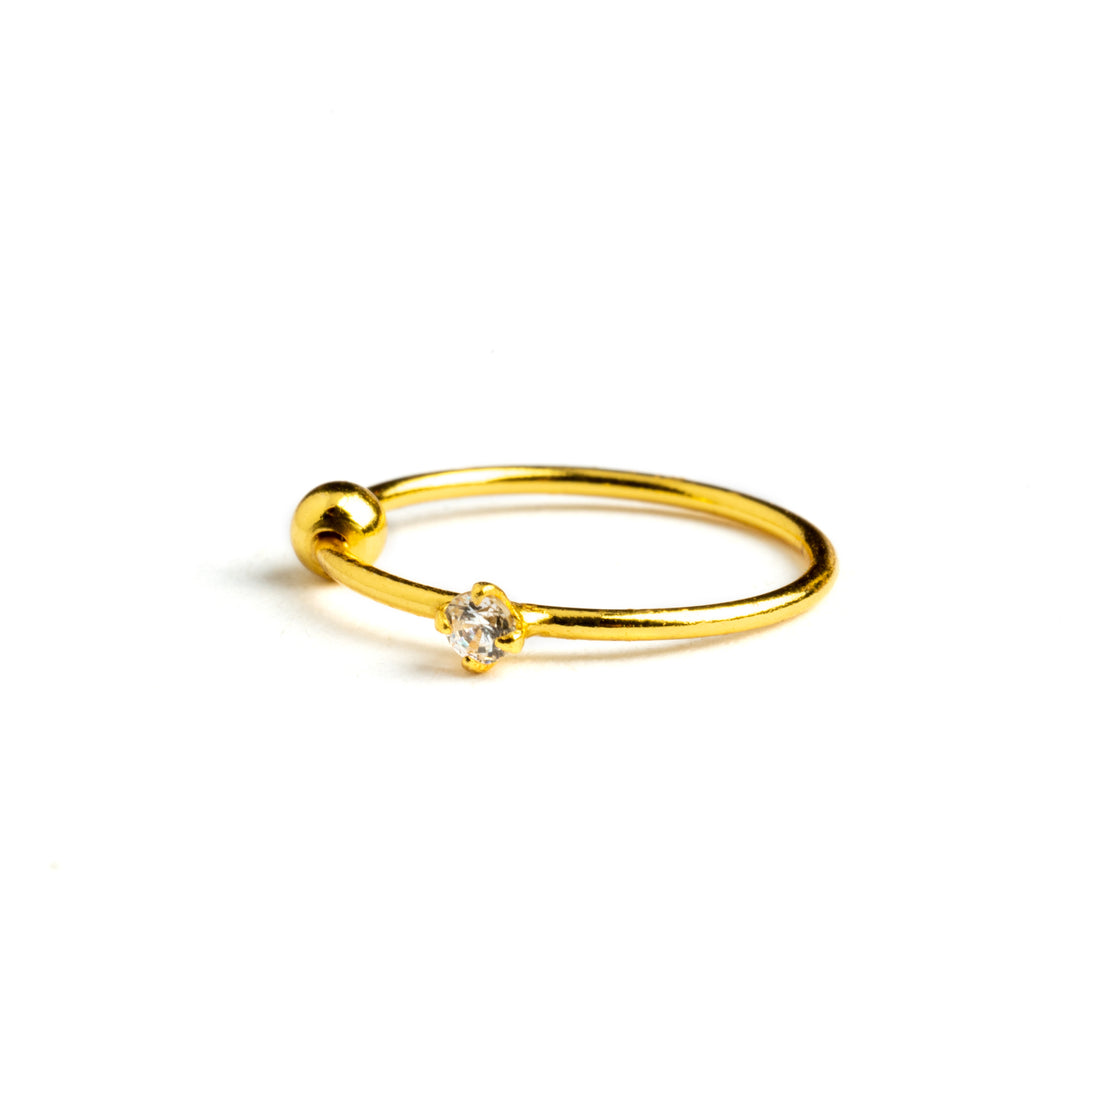 Gold nose ring with Crystal frontal view